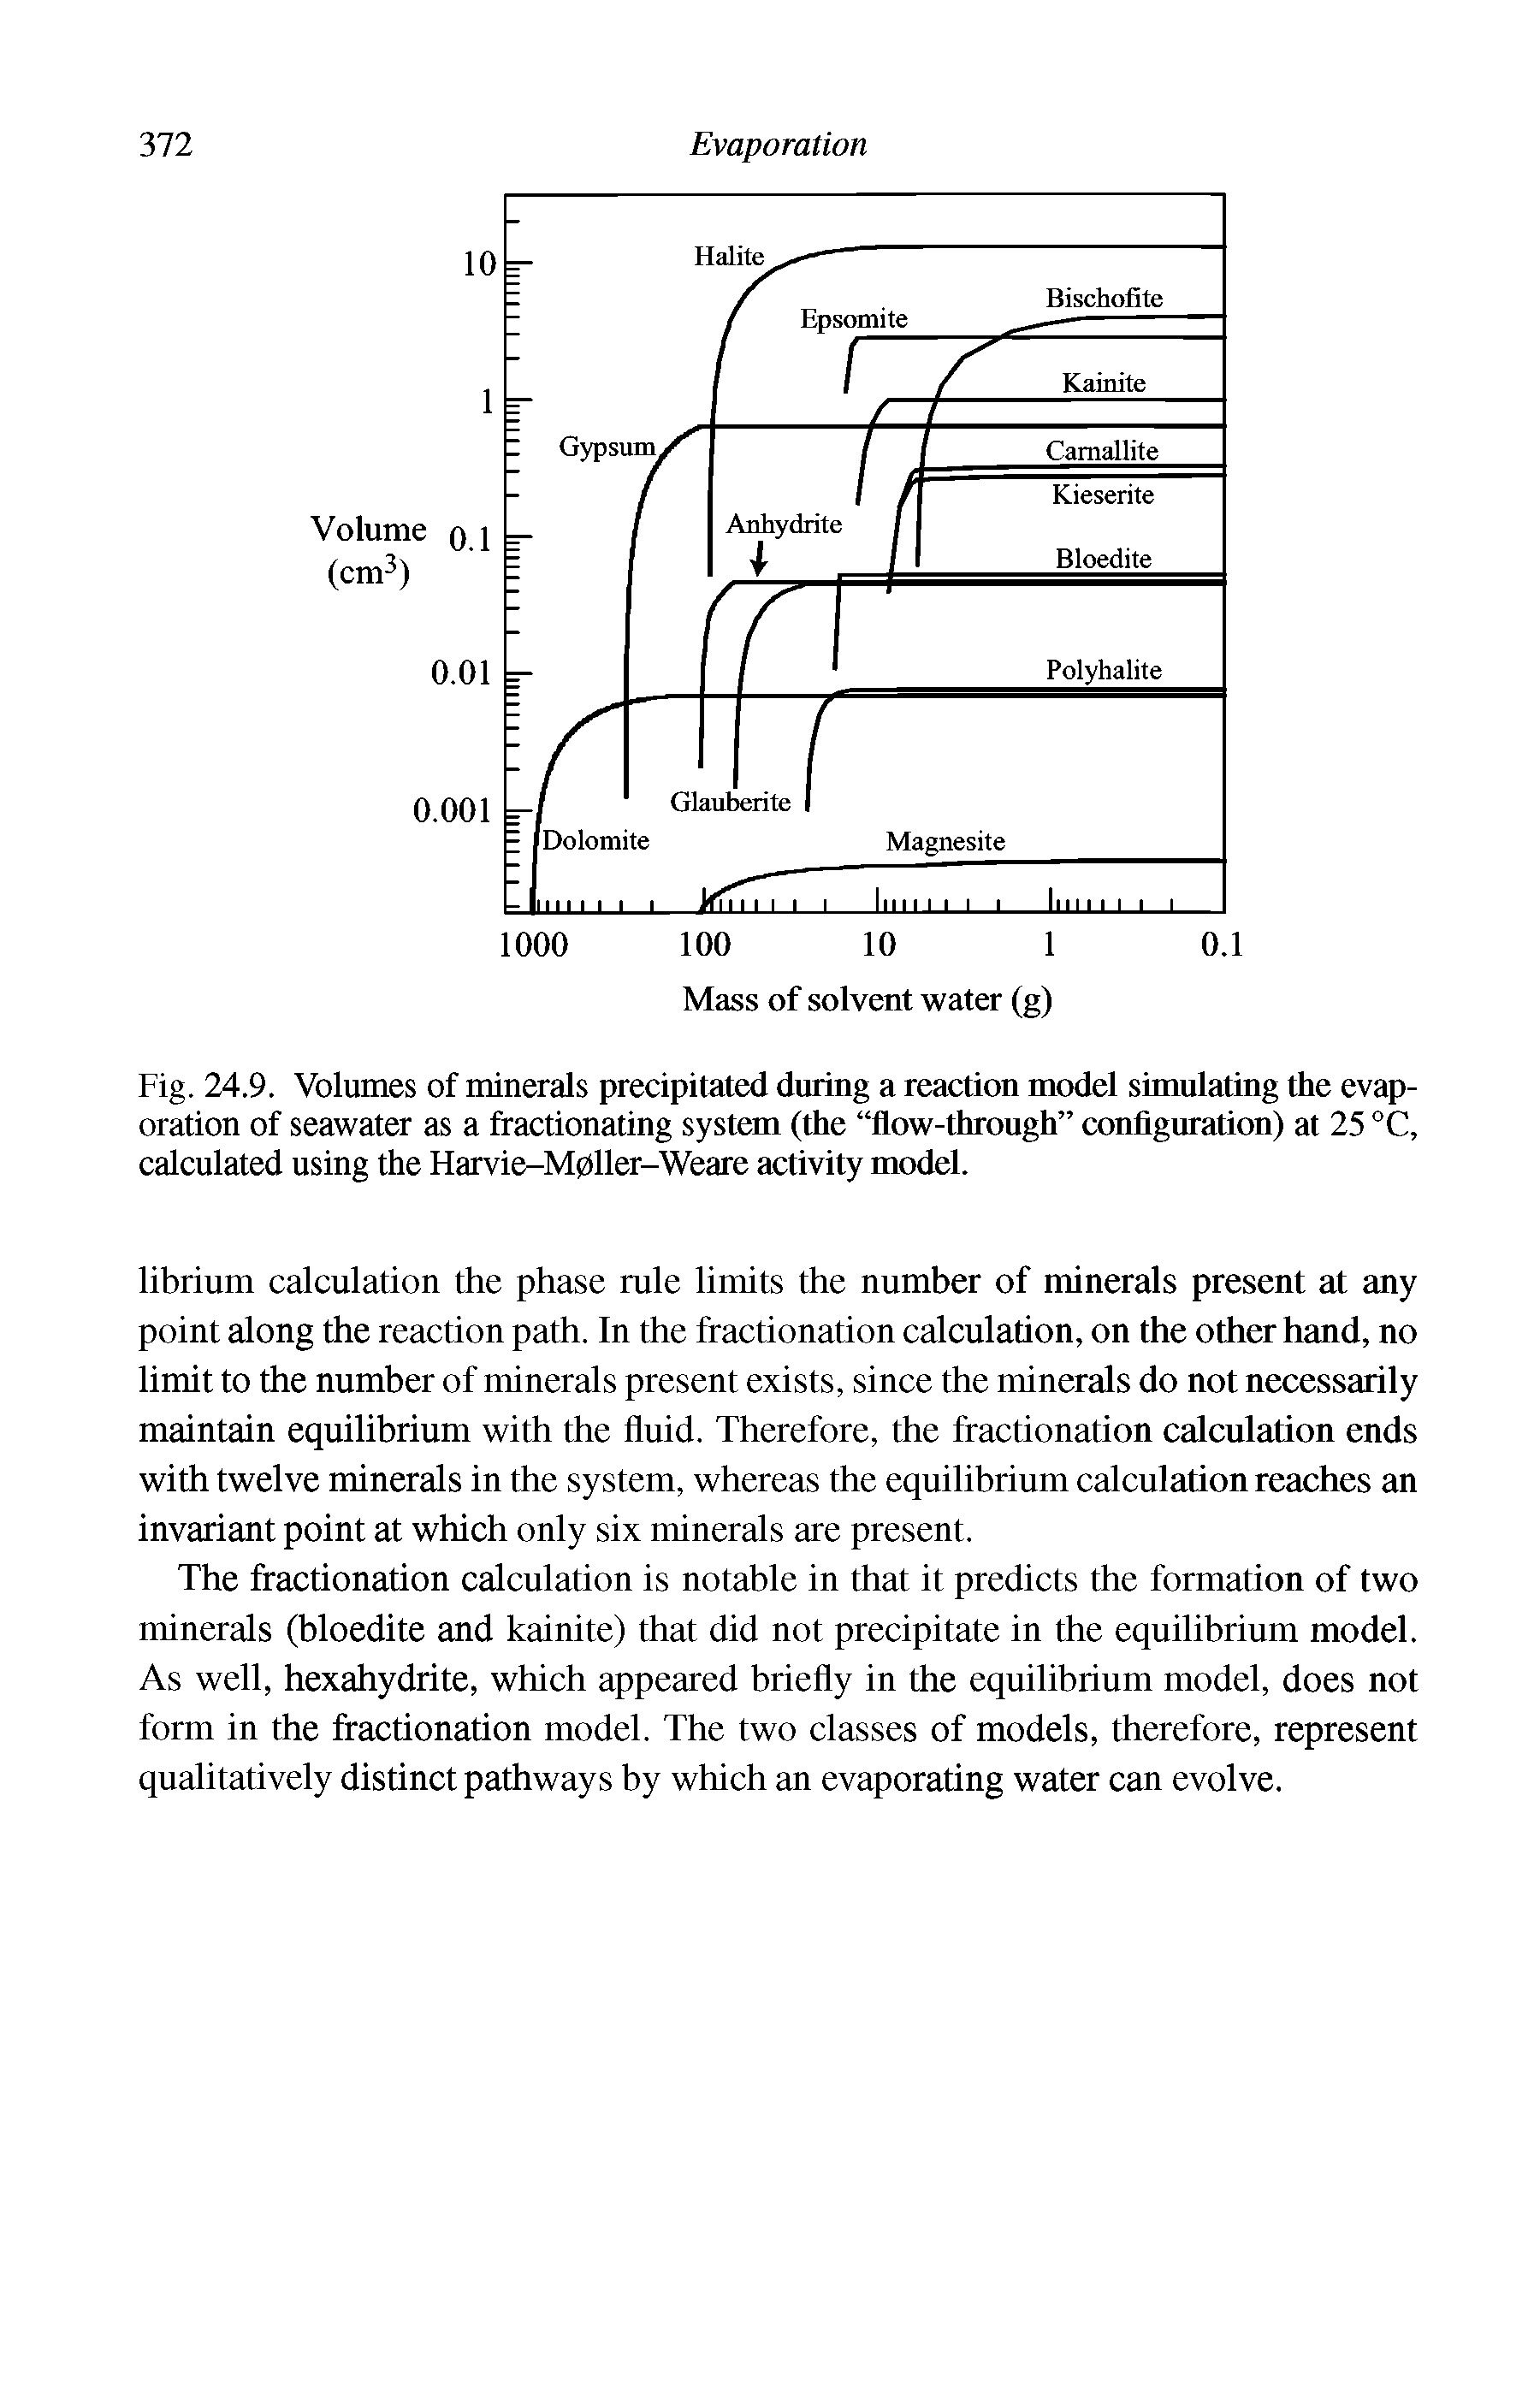 Fig. 24.9. Volumes of minerals precipitated during a reaction model simulating the evaporation of seawater as a fractionating system (the flow-through configuration) at 25 °C, calculated using the Harvie-Mpller-Wearc activity model.